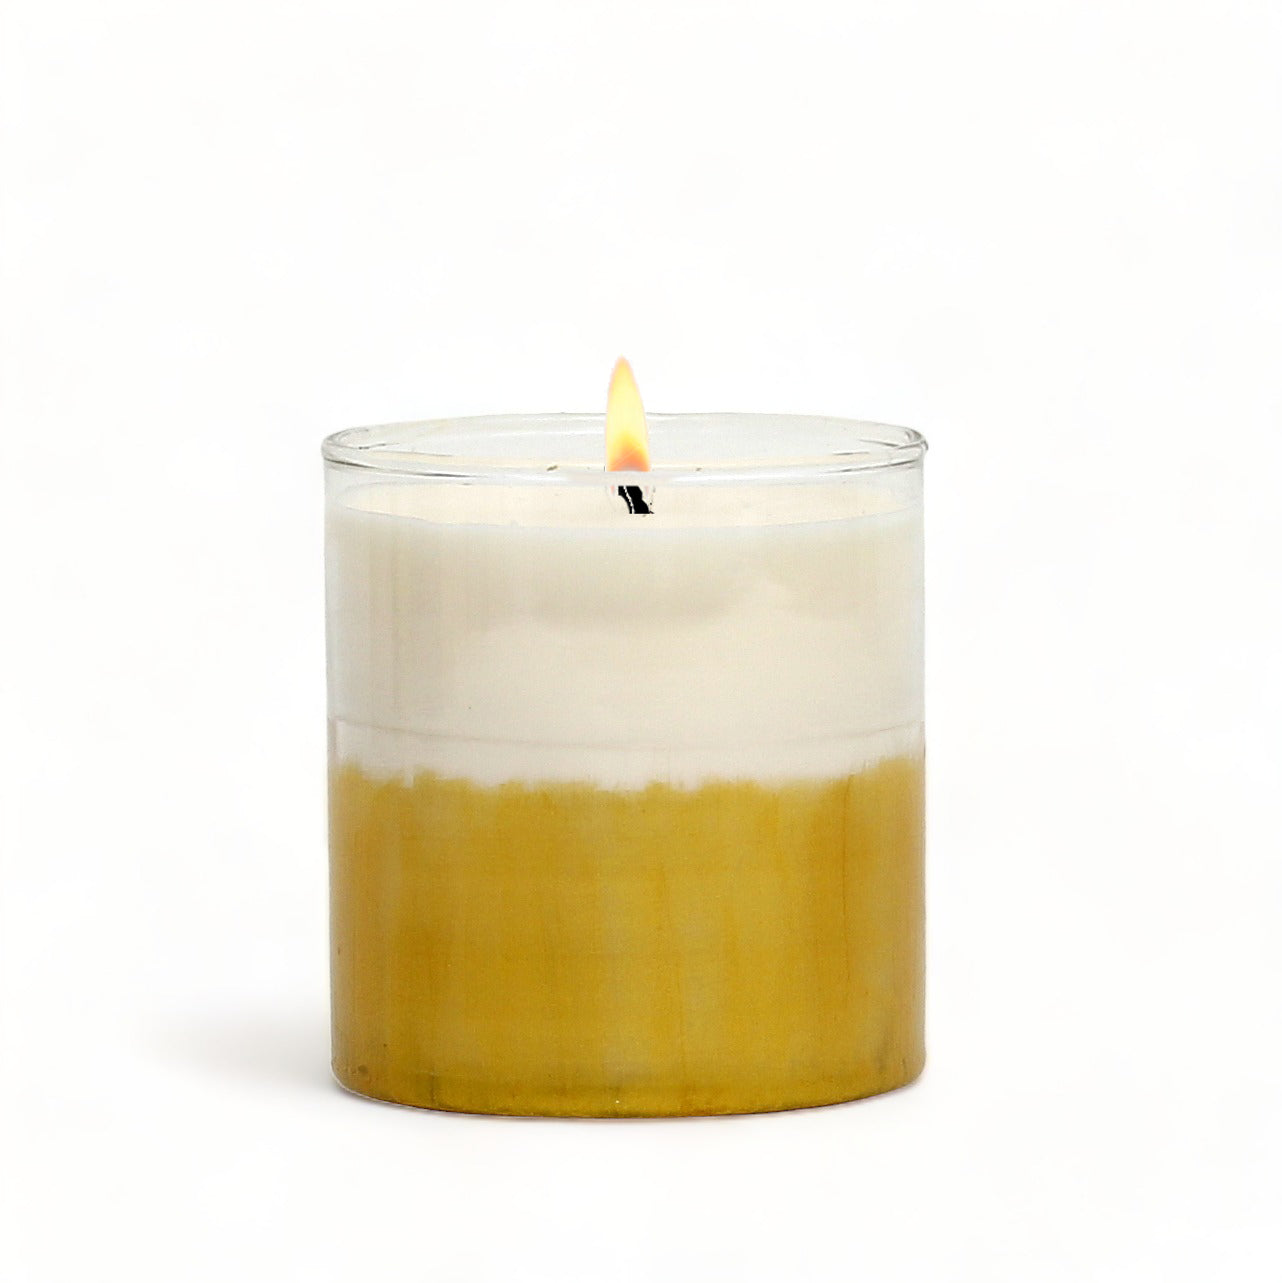 GILDED: Soy Wax Candle with hand painted gold accent. Standard round glass container